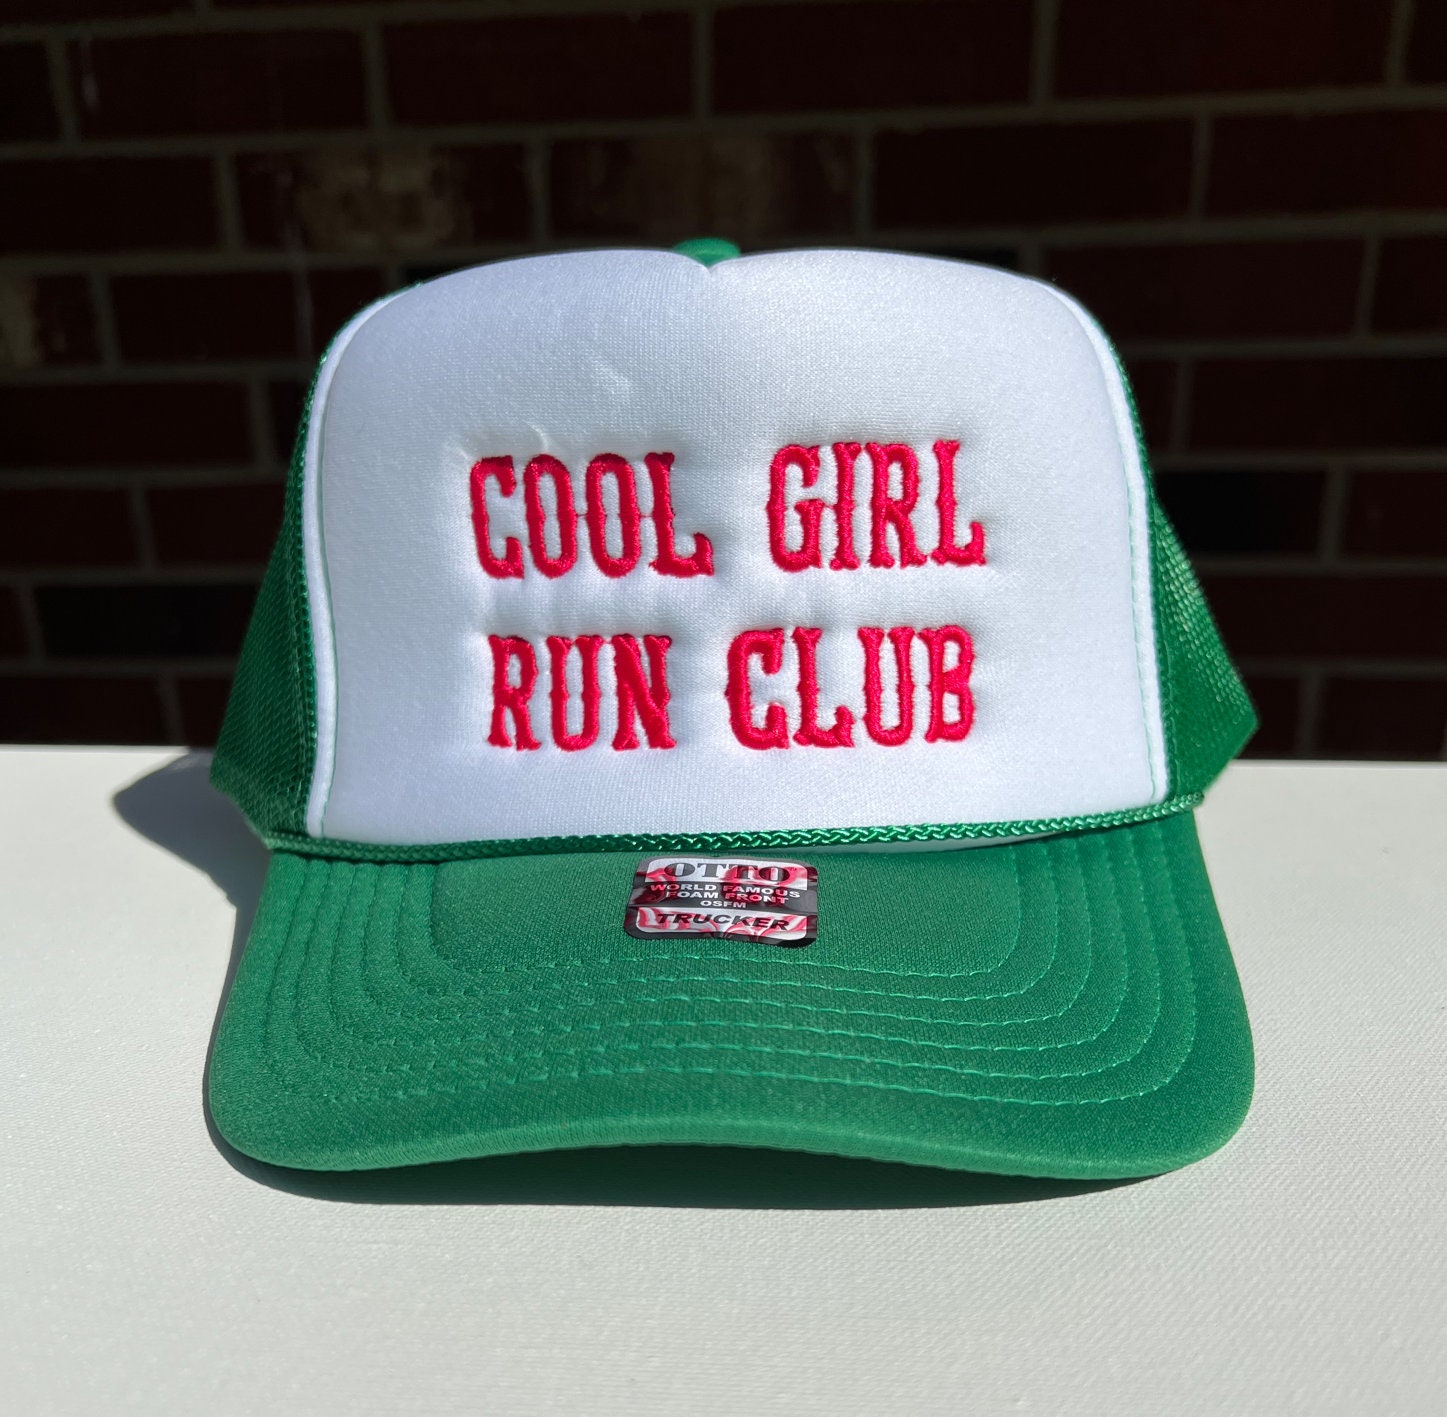 Cool Girl Run Club Embroidered Trucker Hat 